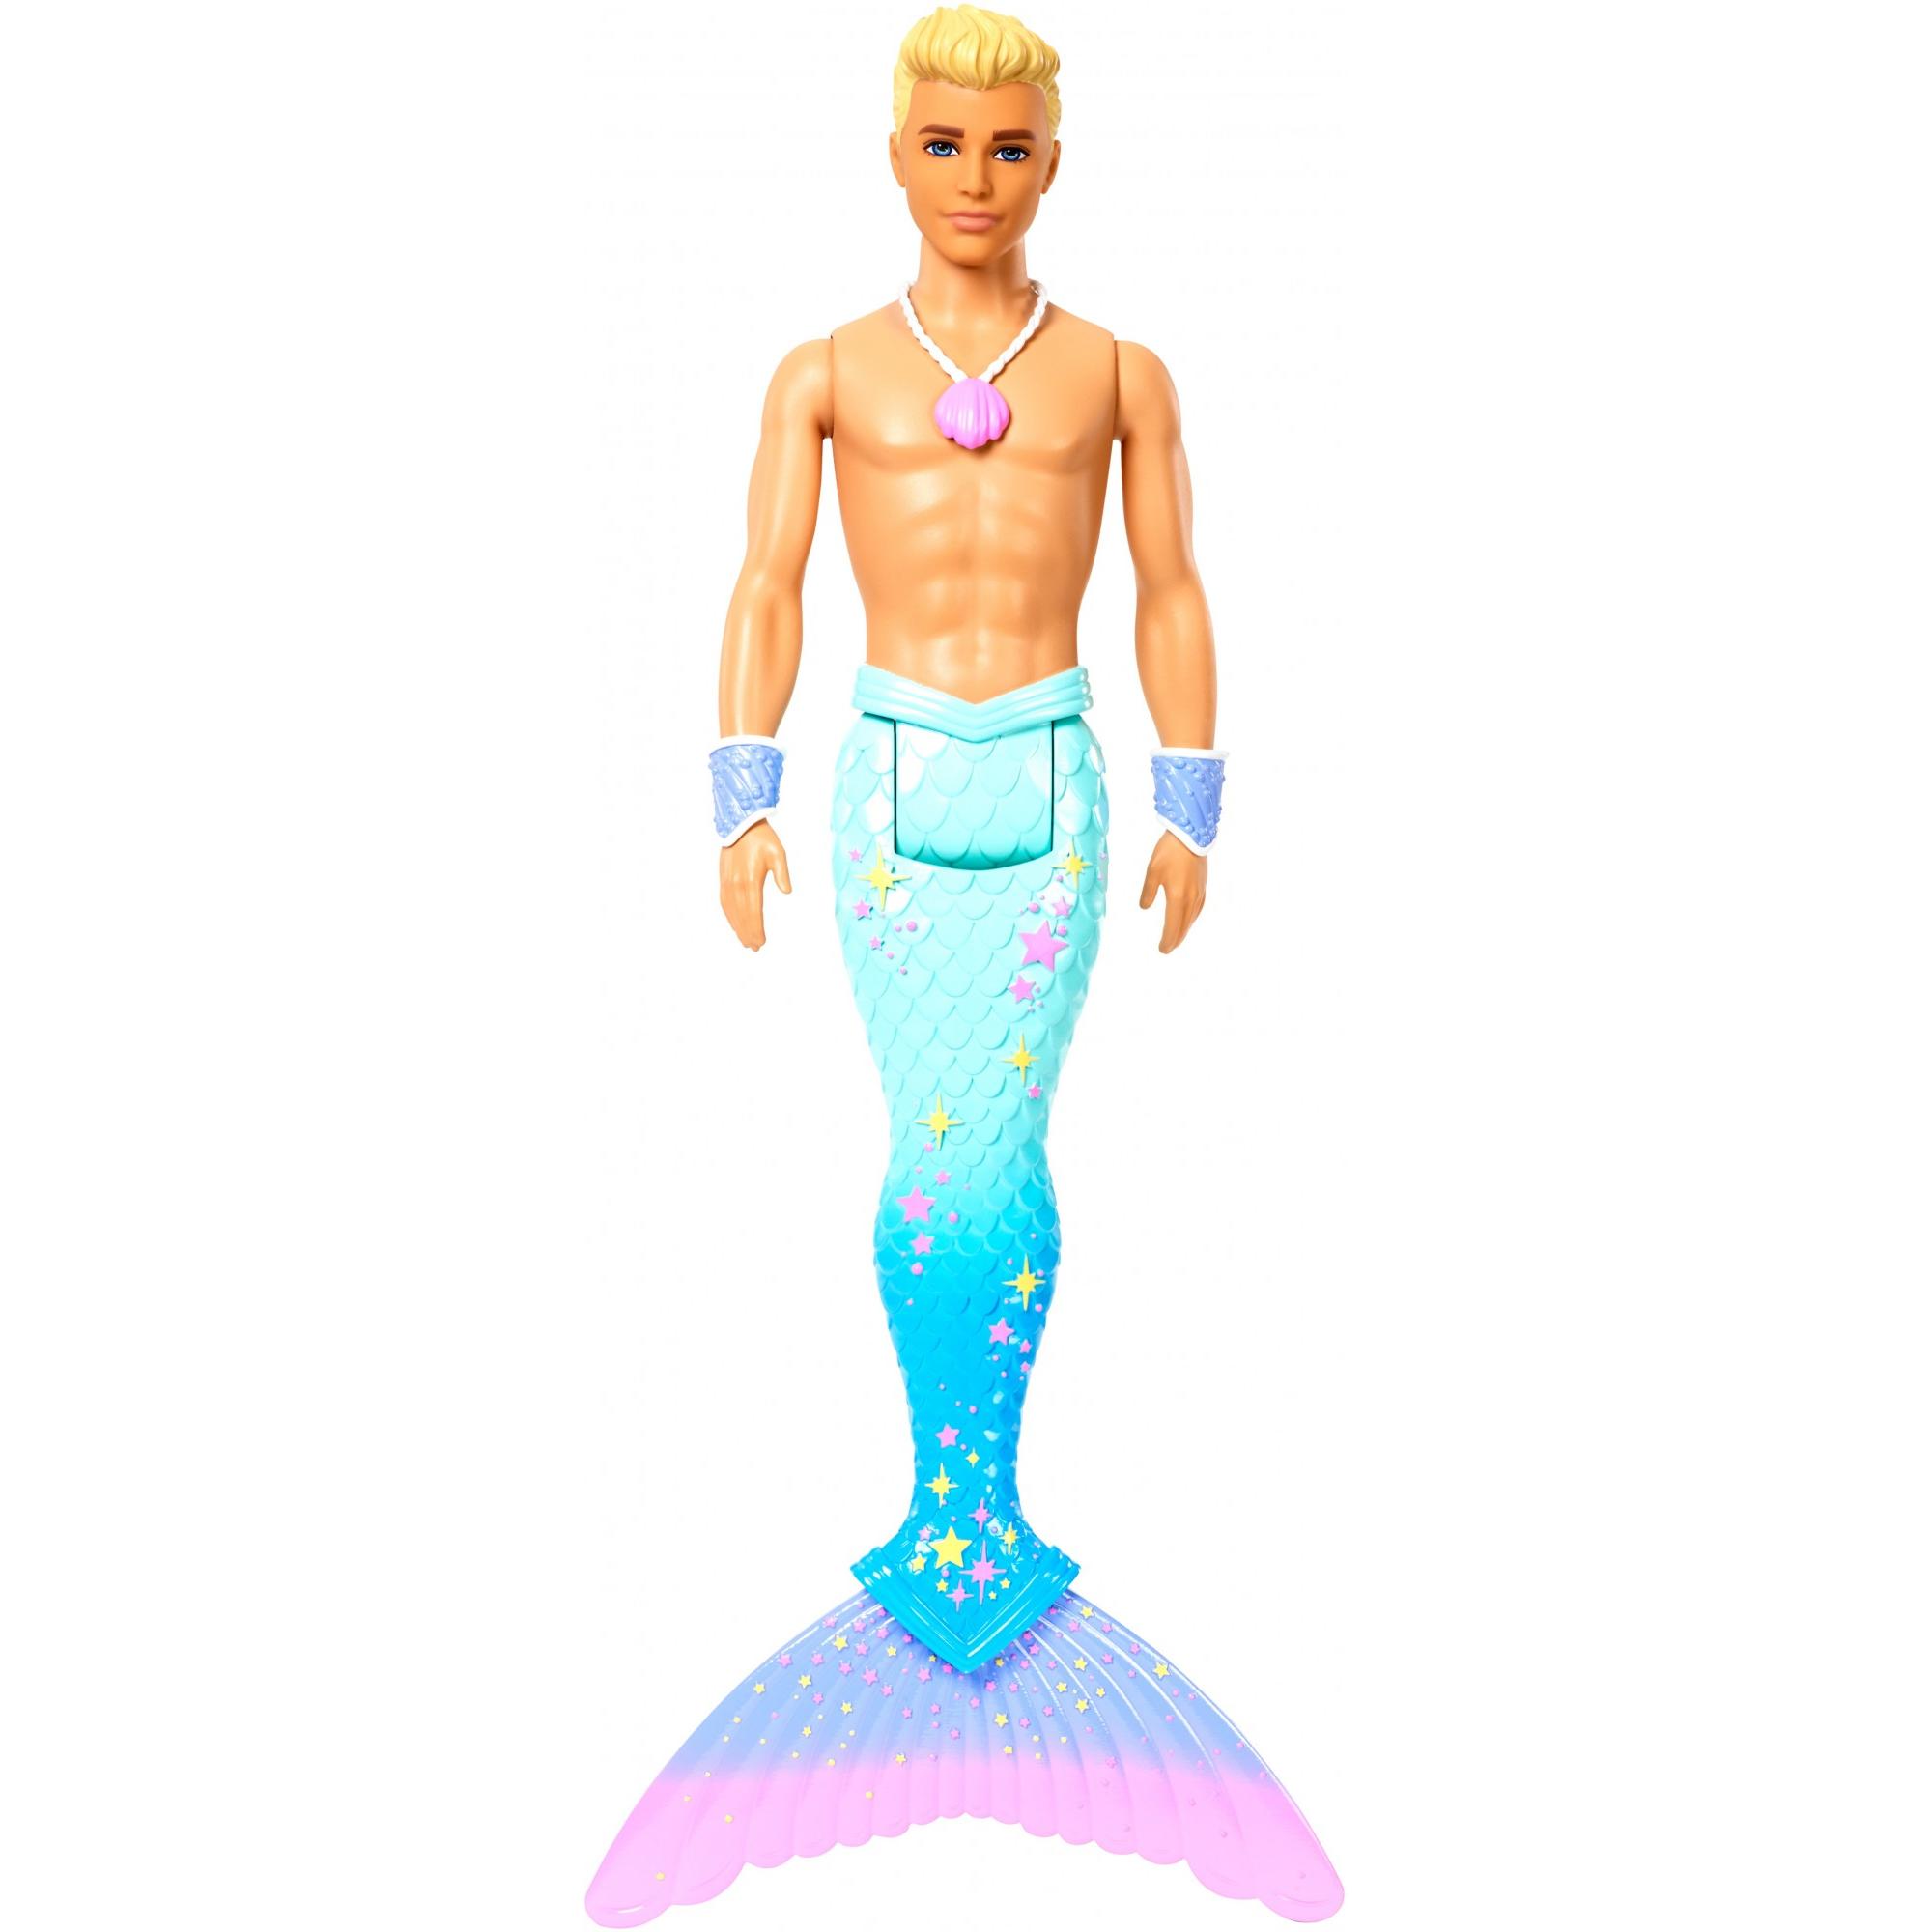 Barbie Dreamtopia Merman Doll, Blonde with Pink Seashell Necklace - image 1 of 6